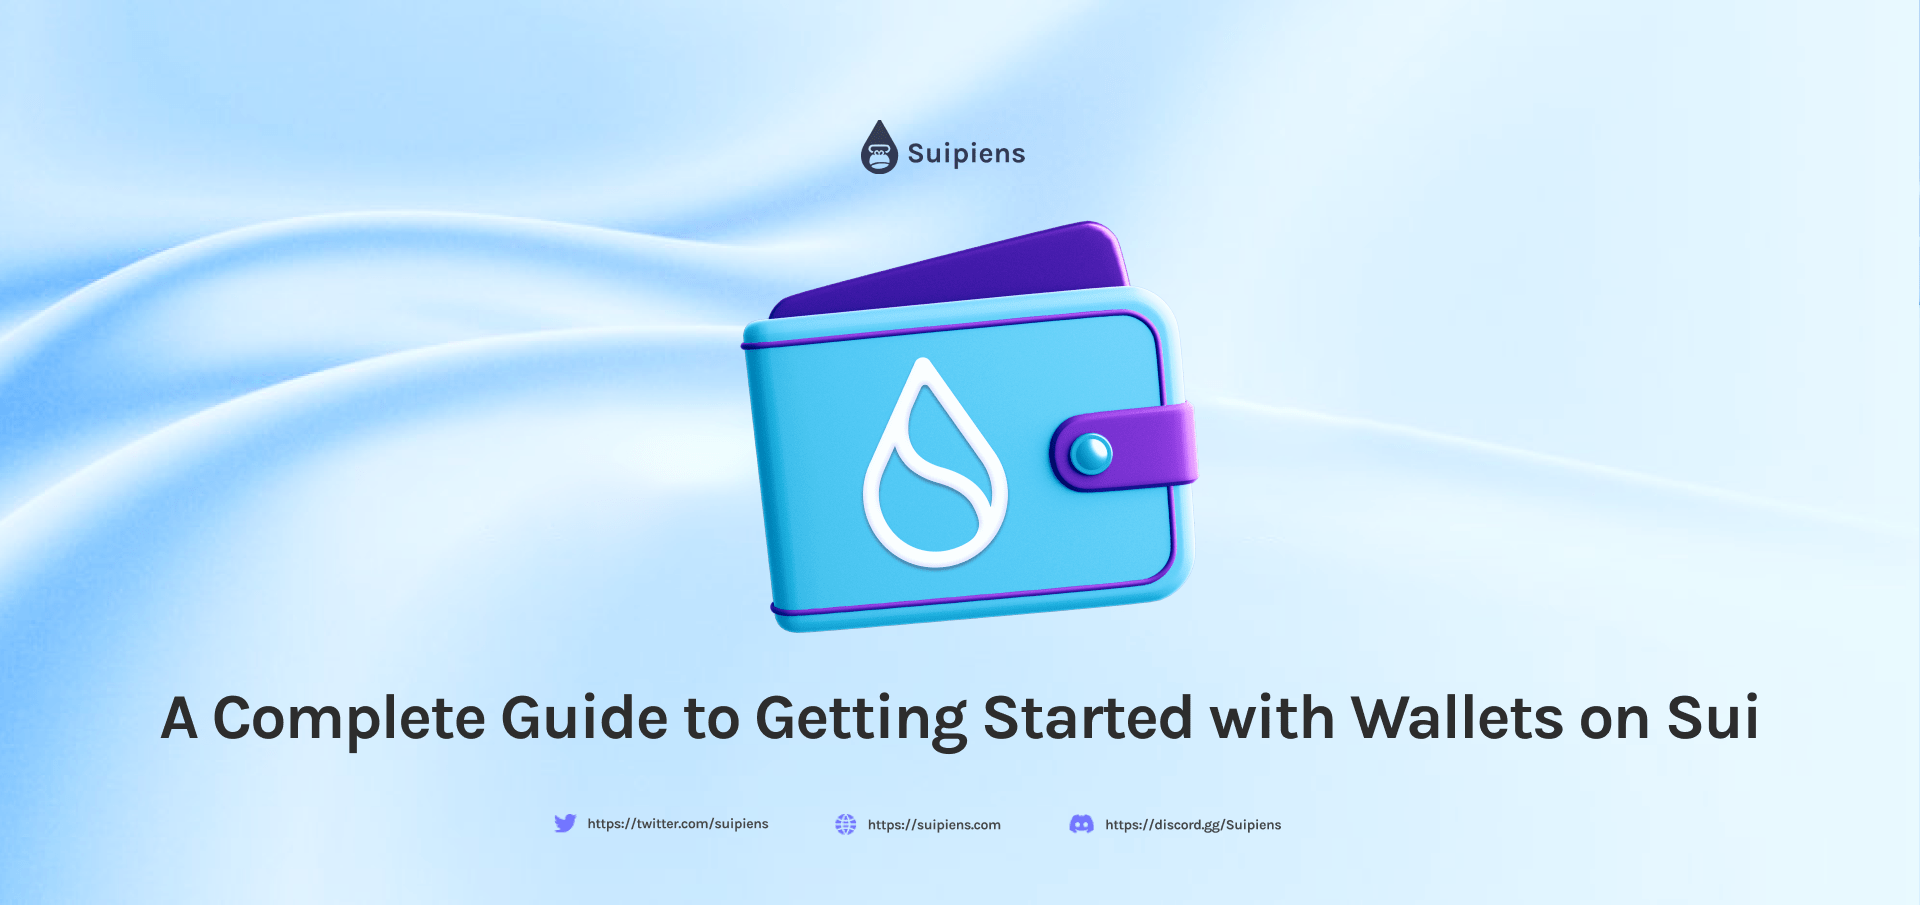 A Complete Guide to Getting Started with Wallets on Sui